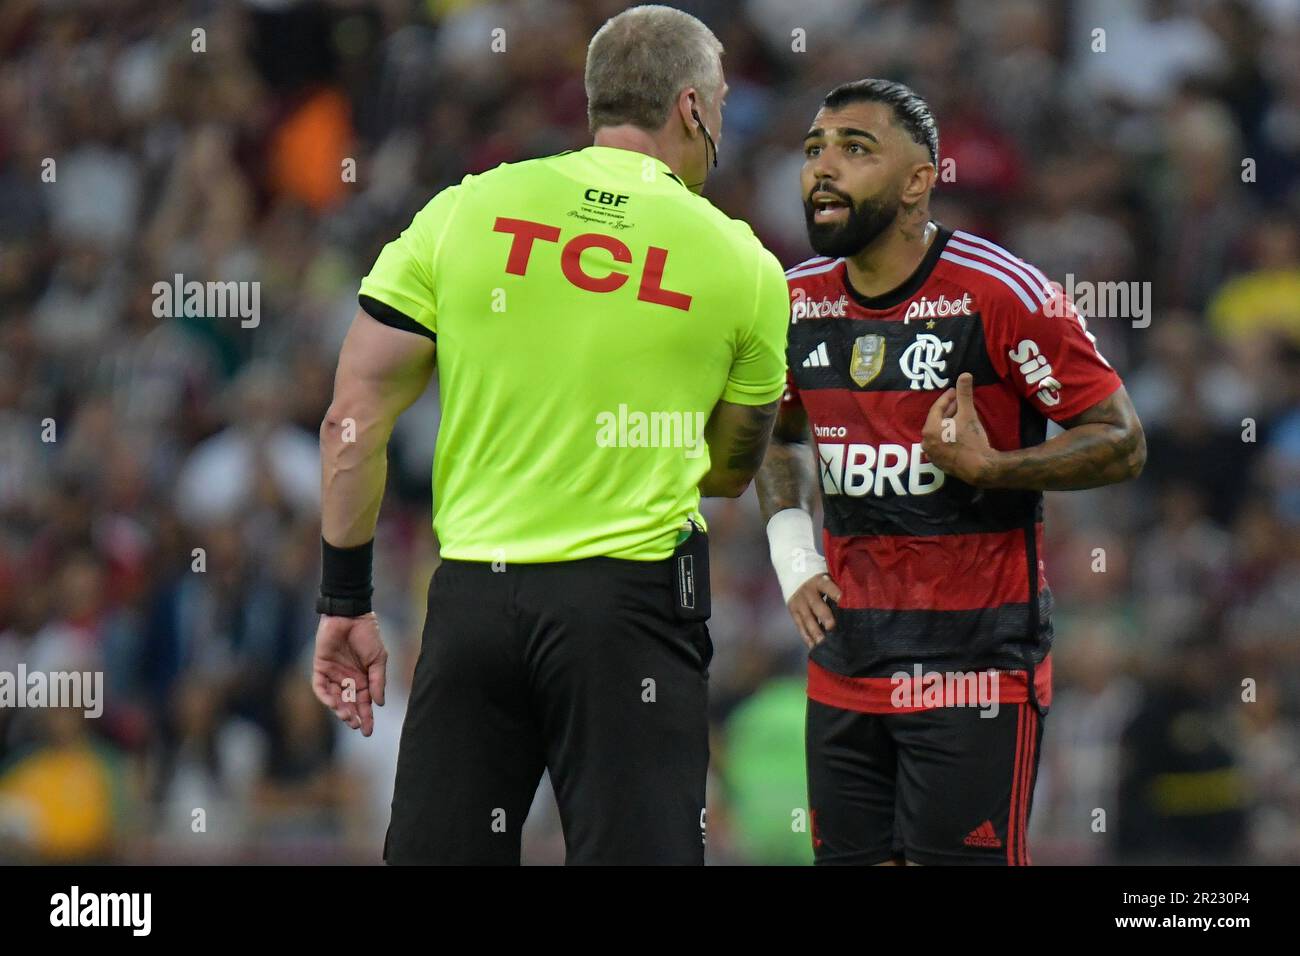 Rio De Janeiro, Brazil. 16th May, 2023. Maracana Stadium Gabriel Barbosa of Flamengo, complains to the referee Anderson Daronco during the match between Fluminense and Flamengo, for the round of 16 of the 2023 Copa do Brasil, at Maracana Stadium, this Tuesday, 16. 30761 (Marcello Dias/SPP) Credit: SPP Sport Press Photo. /Alamy Live News Stock Photo